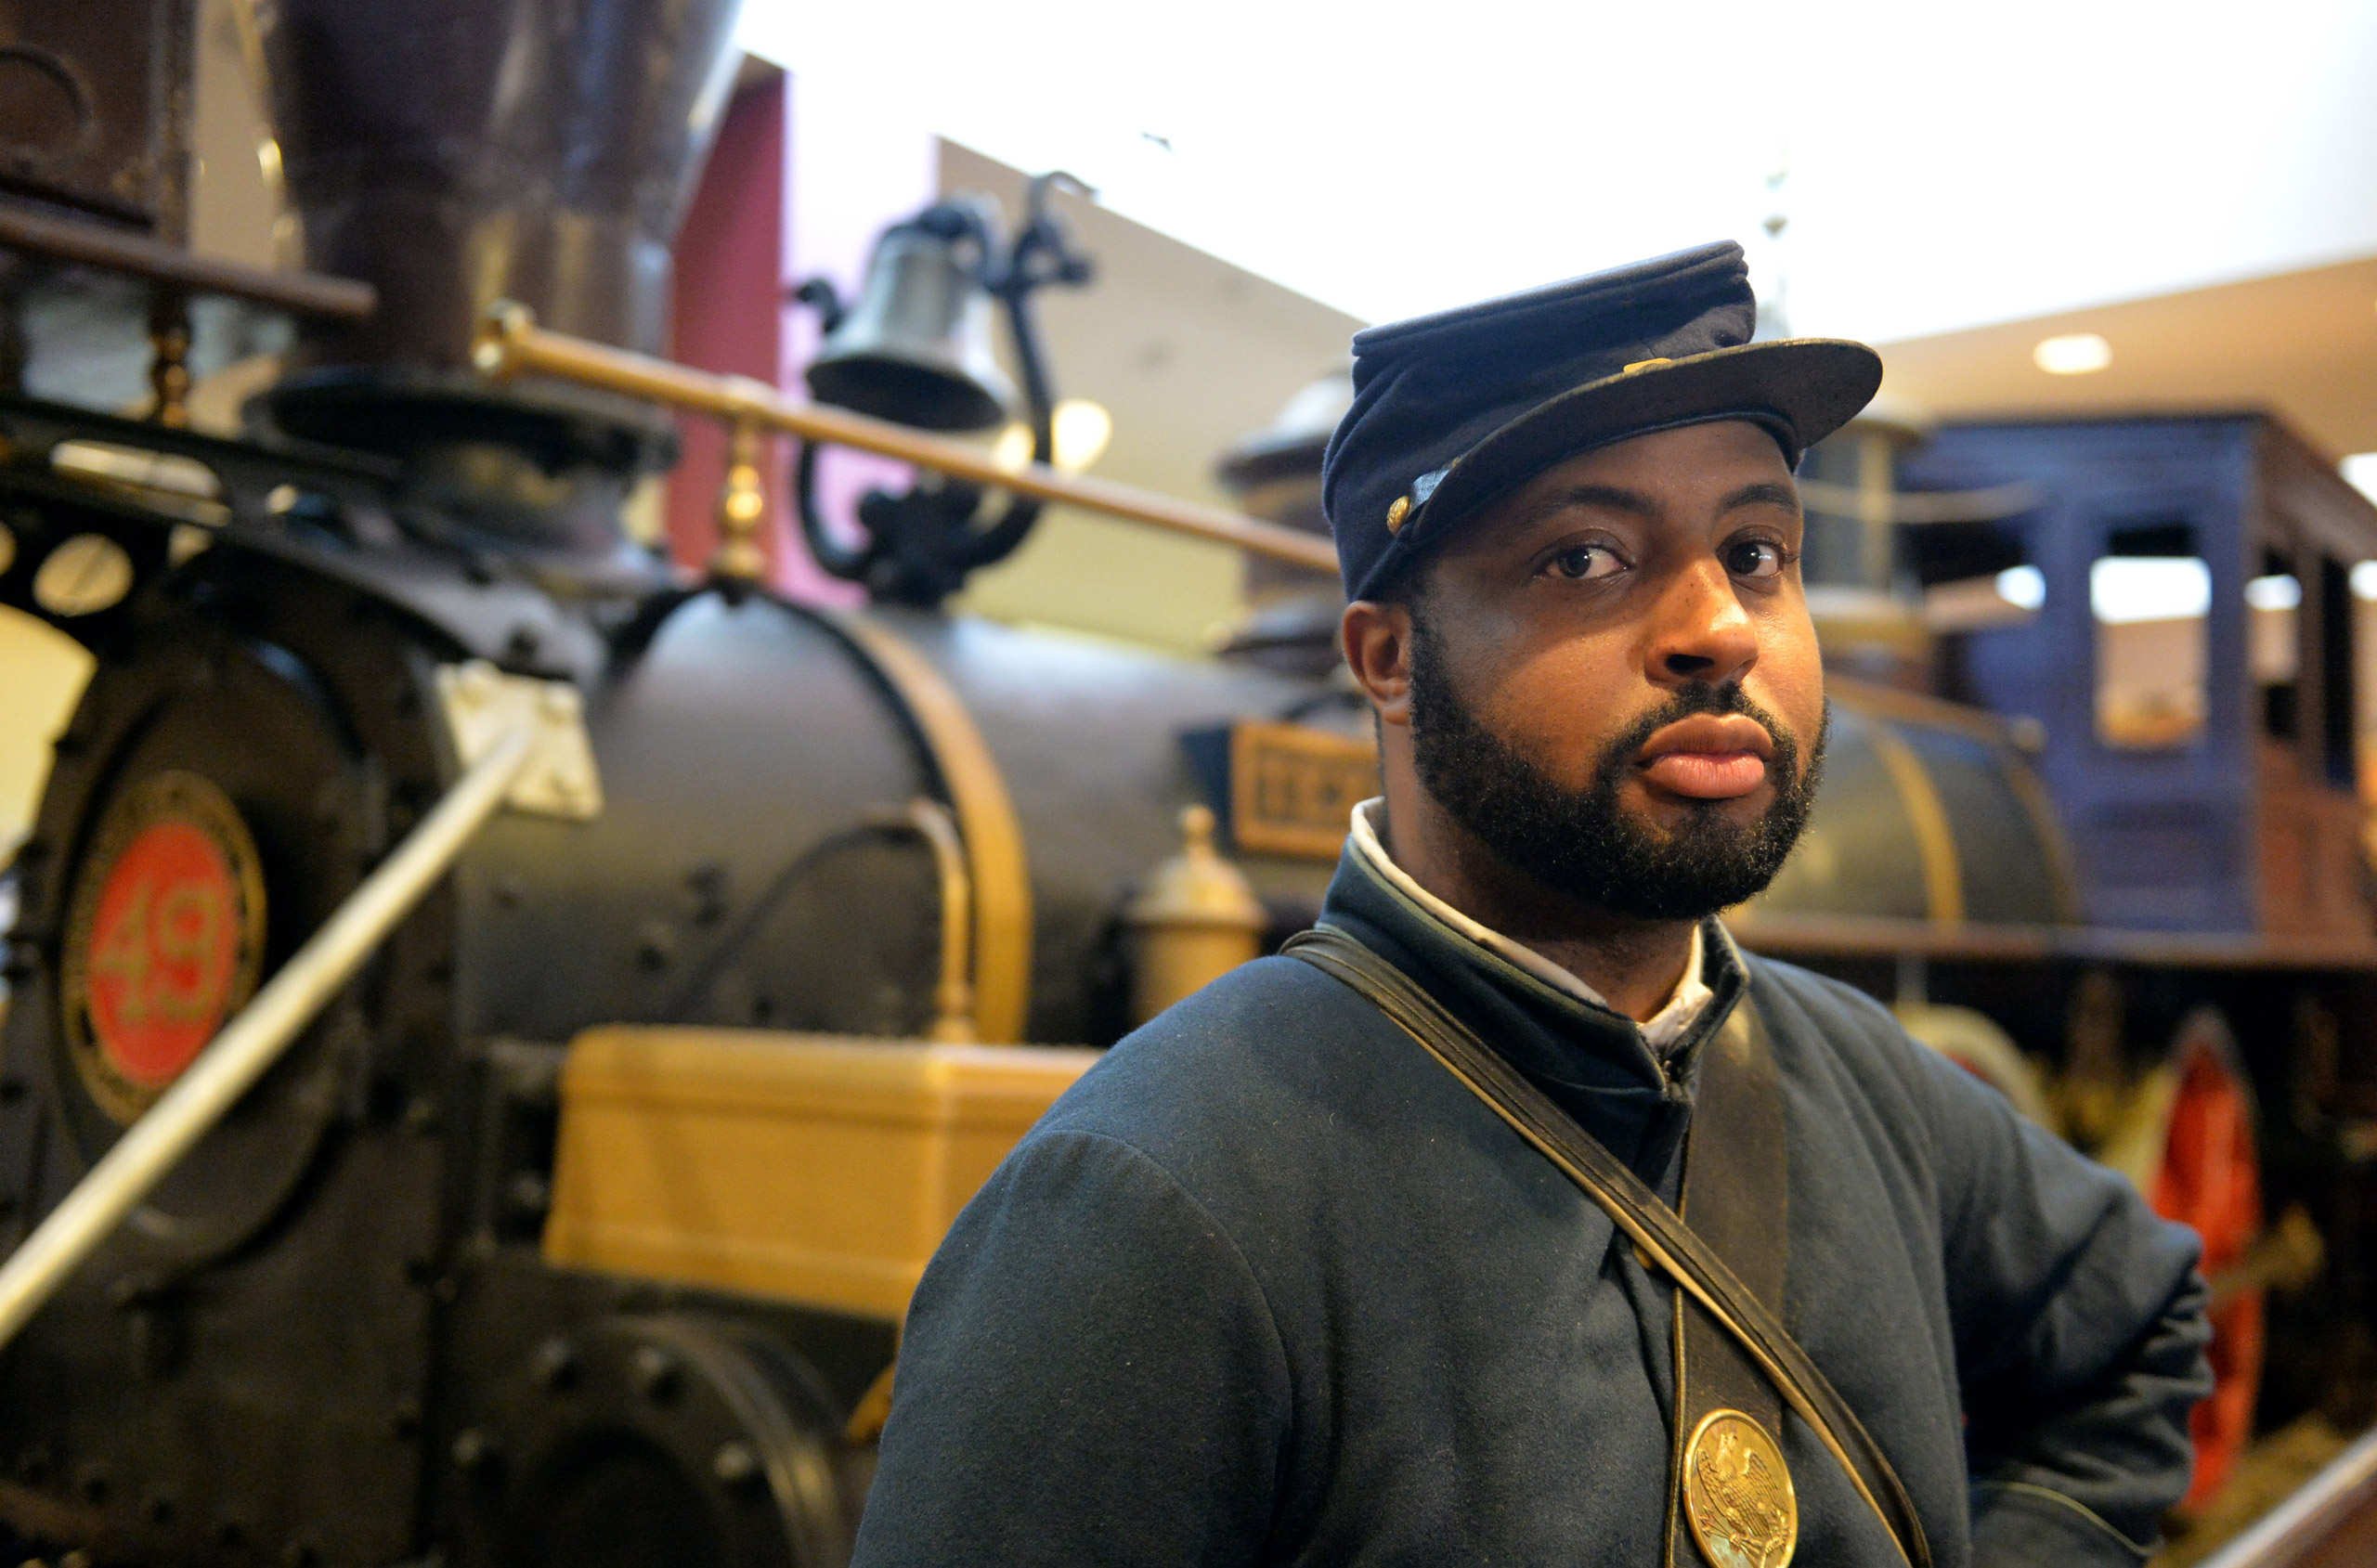 Re-enactor Marvin-Alonzo Greer is shown during a Juneteenth celebration at the Atlanta Cyclorama and Civil War Museum, June 20, 2014. (Kent D. Johnson—AP Photo)